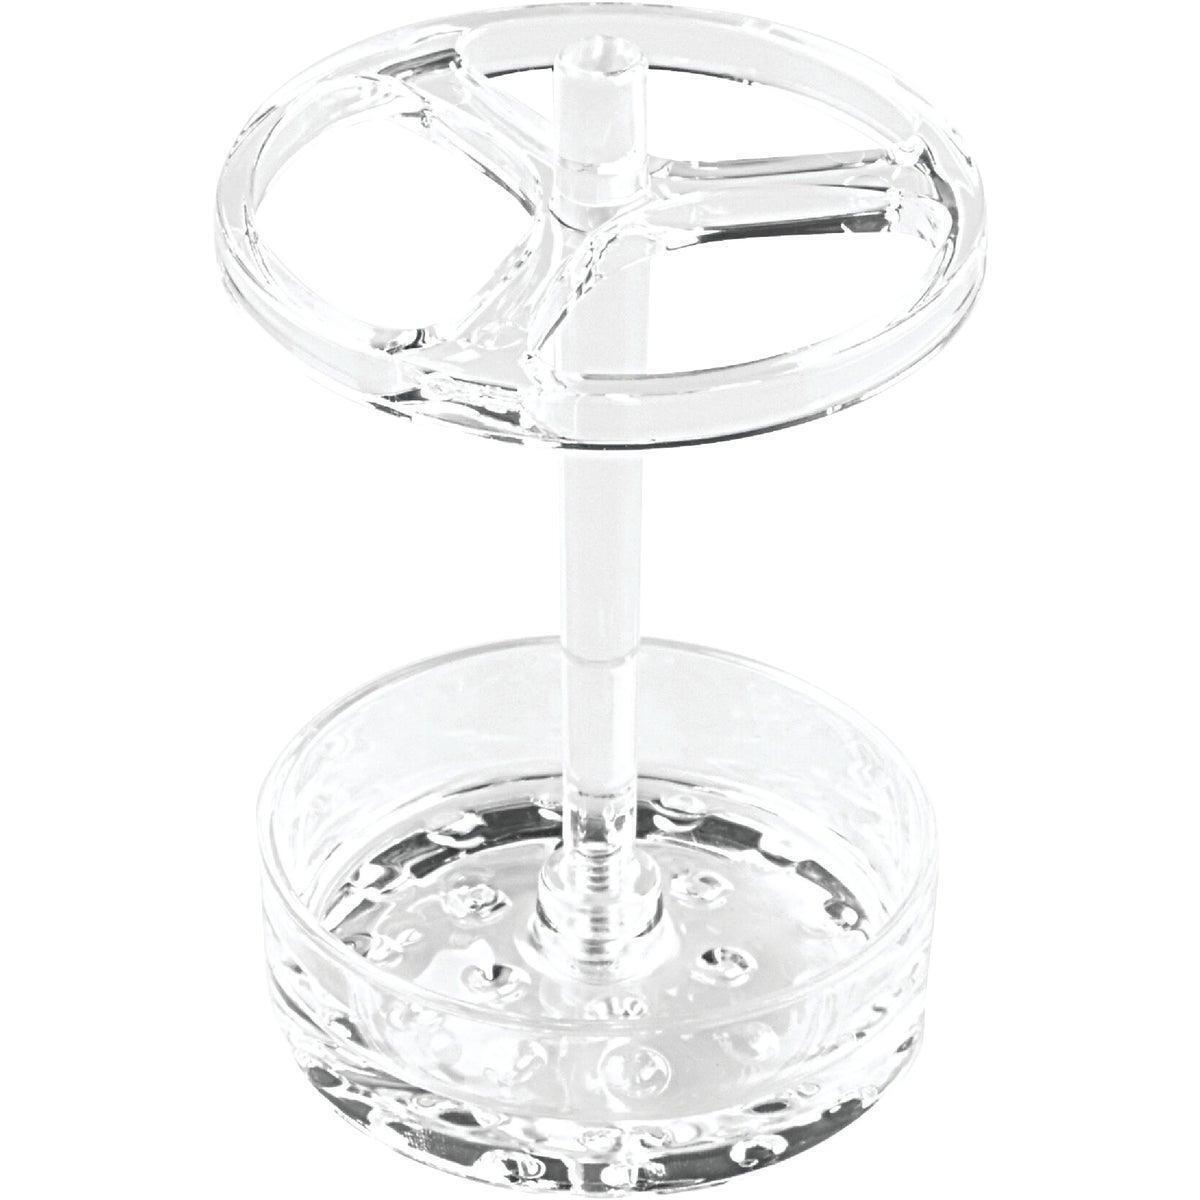 iDesign Eva Clear Acrylic Toothbrush Stand 55920